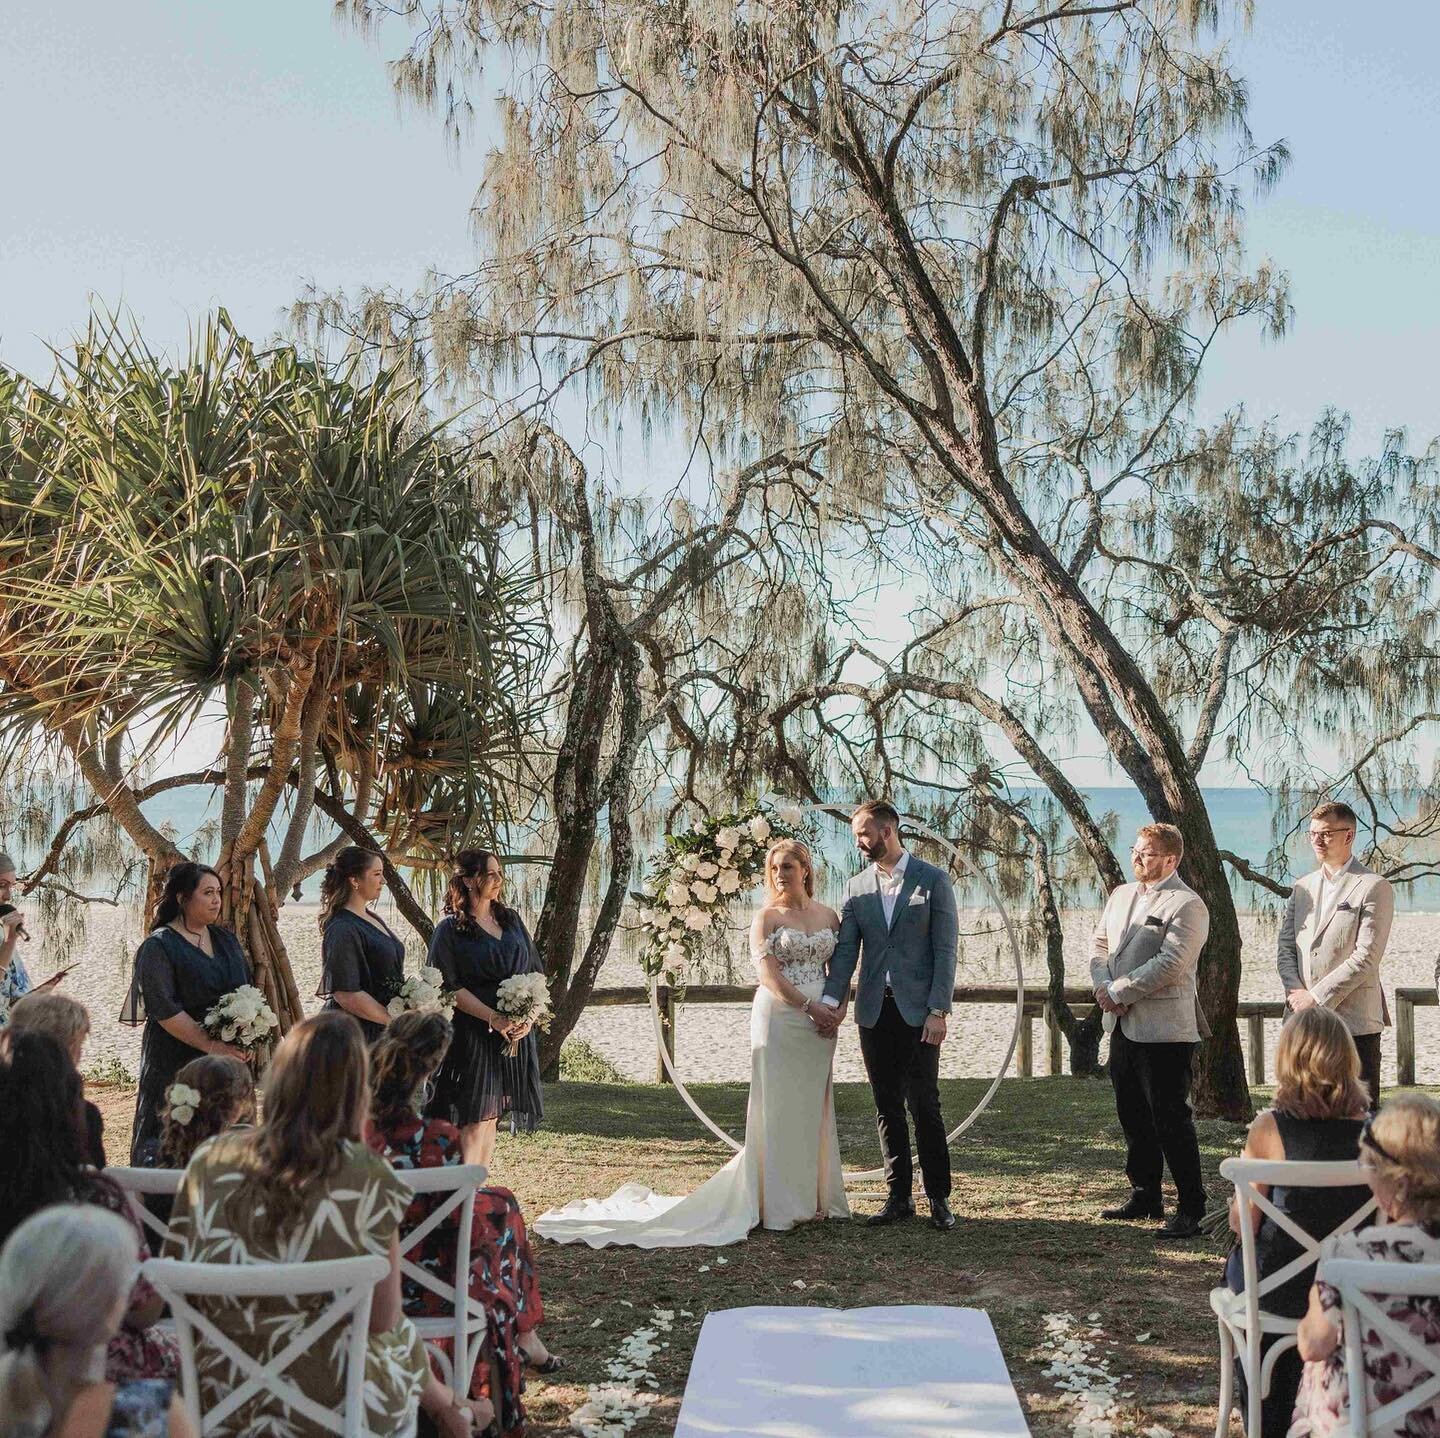 Noosa Ceremony spotlight - Hidden Grove

What you need to know:

✨Access #16�
✨Capacity up to 100
✨Second most popular choice with couples

Tucked away among lush trees yet conveniently close to Hastings St restaurants and caf&eacute;s, Hidden Grove 